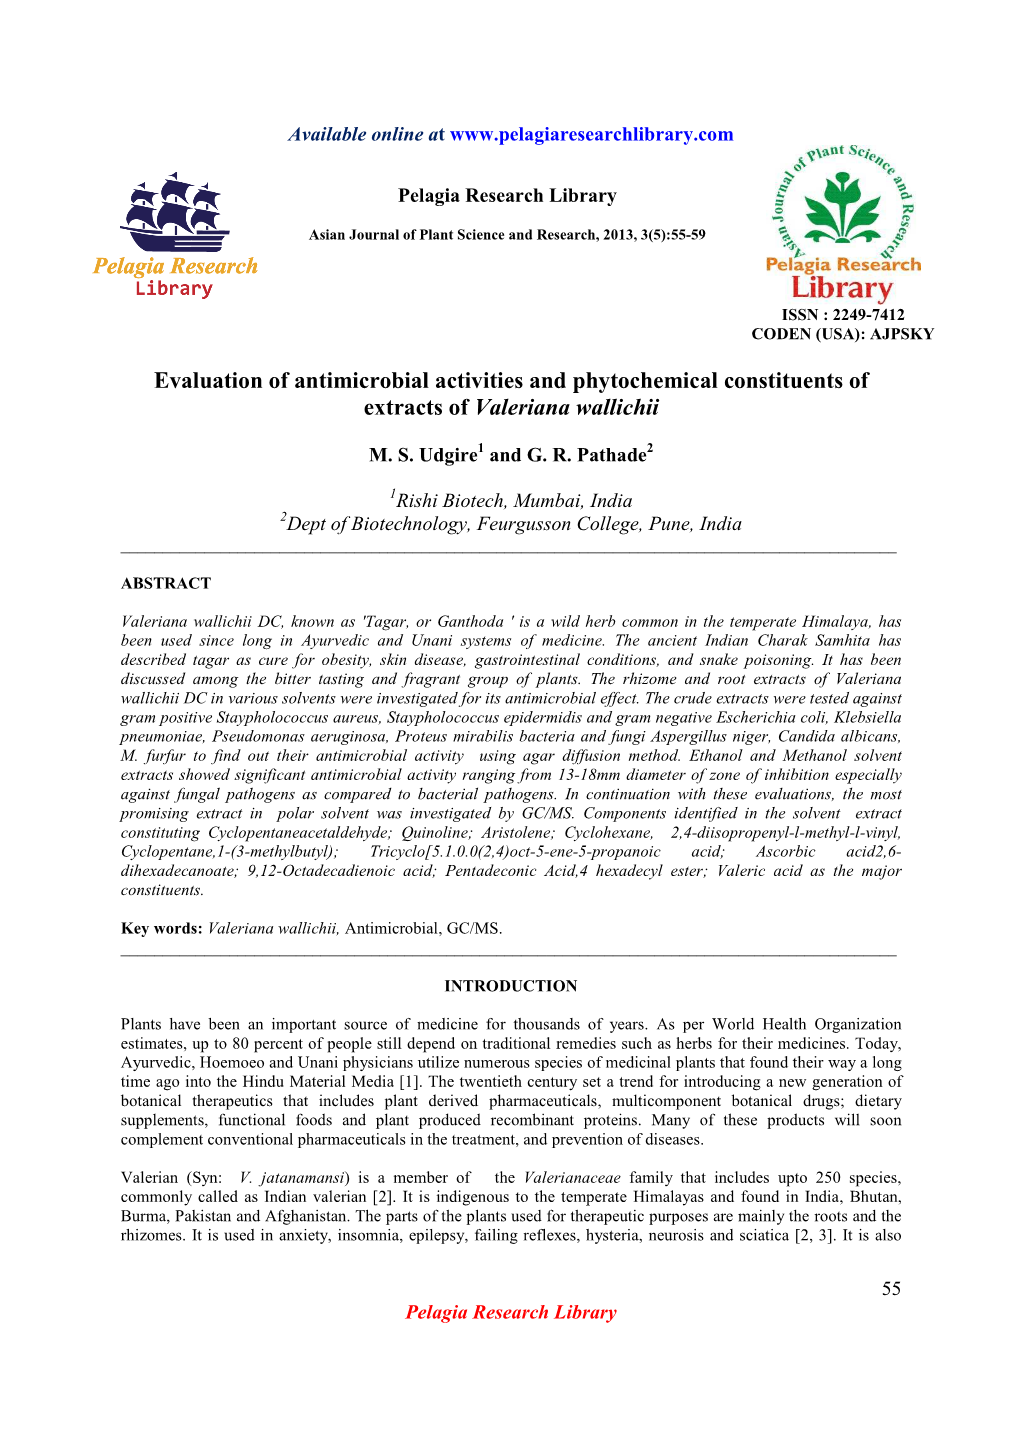 Evaluation of Antimicrobial Activities and Phytochemical Constituents of Extracts of Valeriana Wallichii